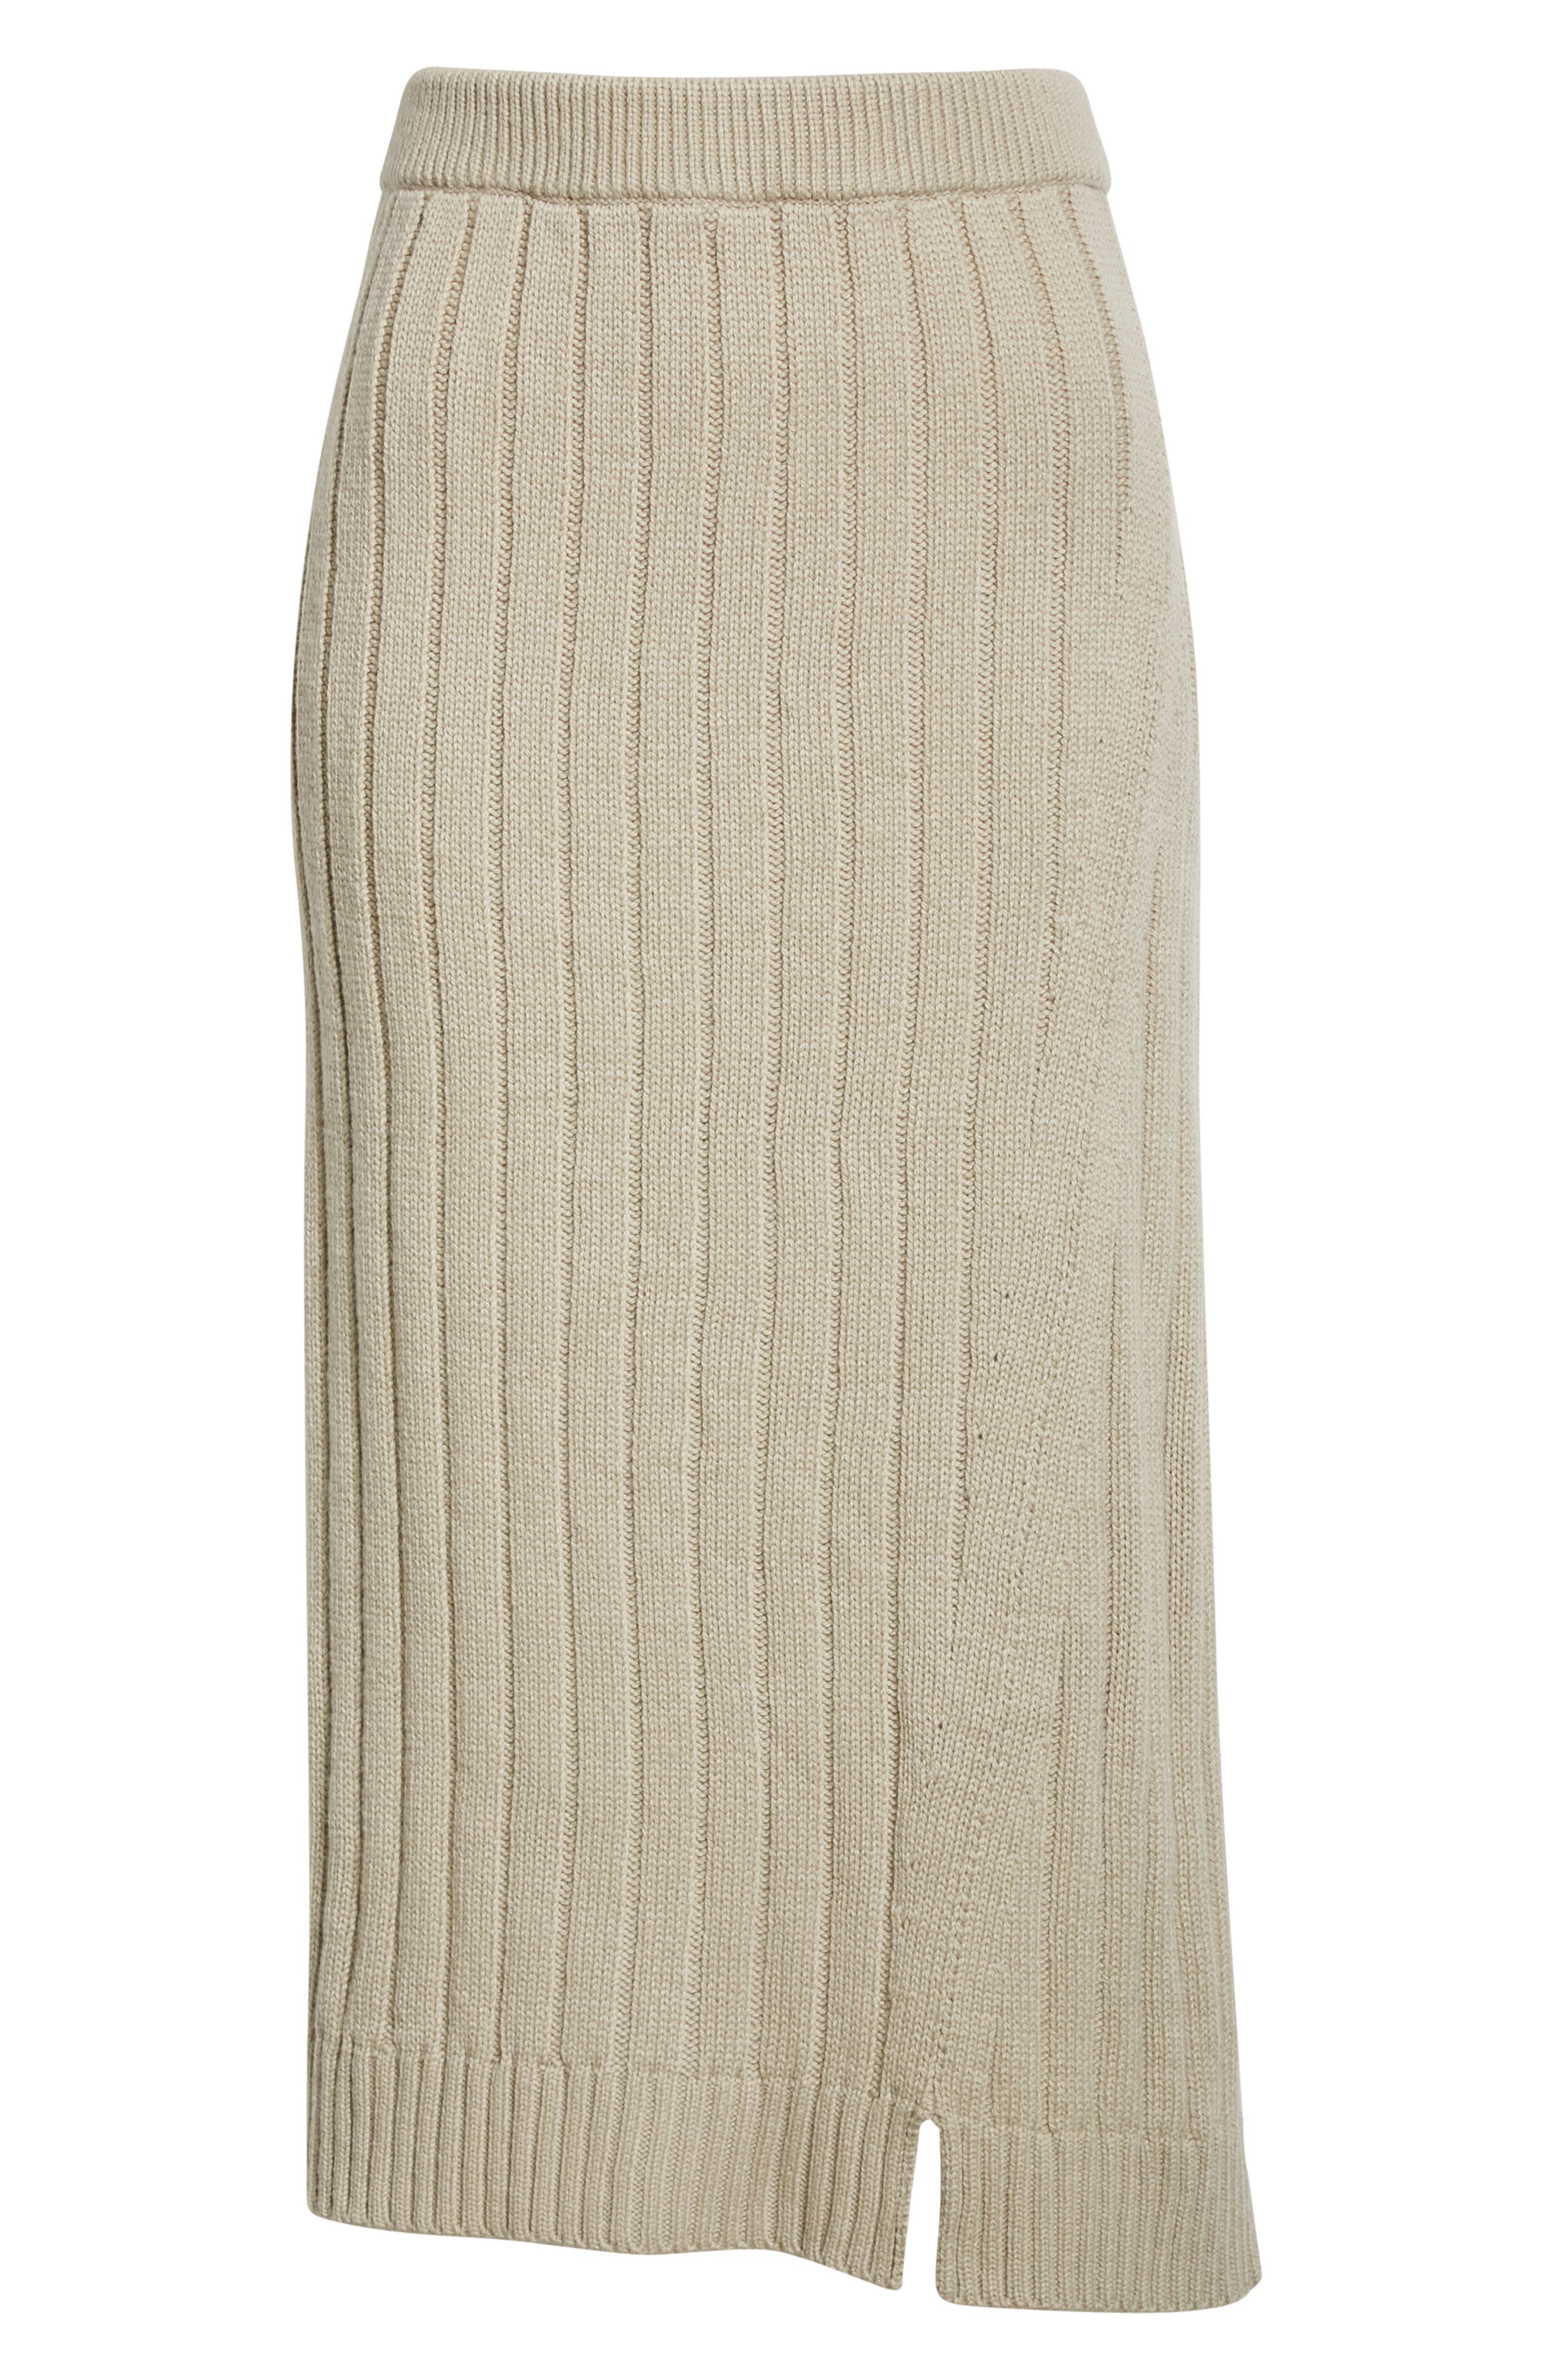 The Row Dejan Rib Cashmere Skirt in Sahara at Nordstrom, Size Small